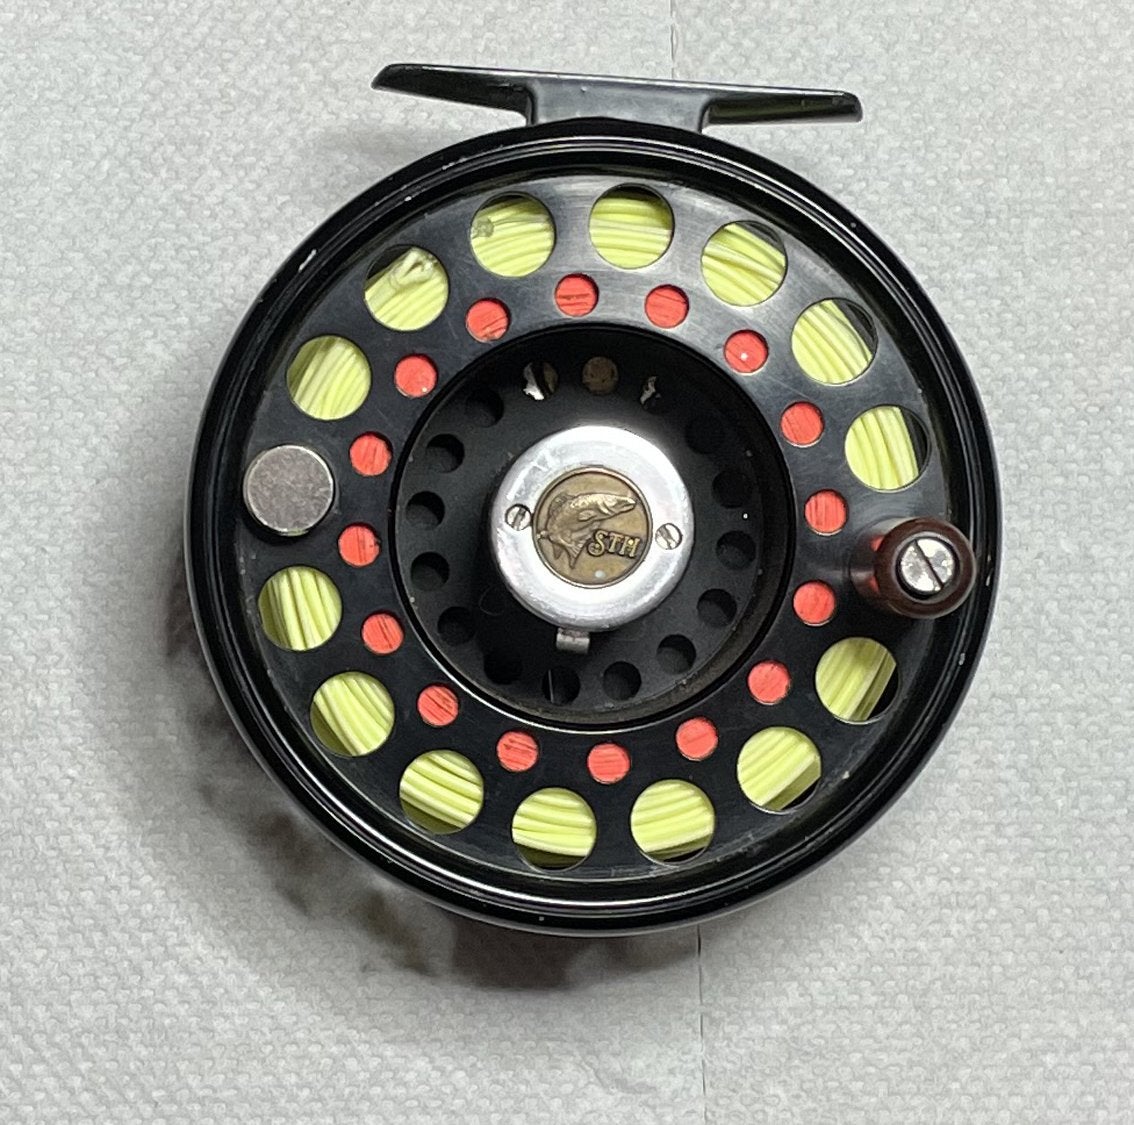 STH Airweight LDM Fly Fishing Reel. Lever Drag. Made in Argentina